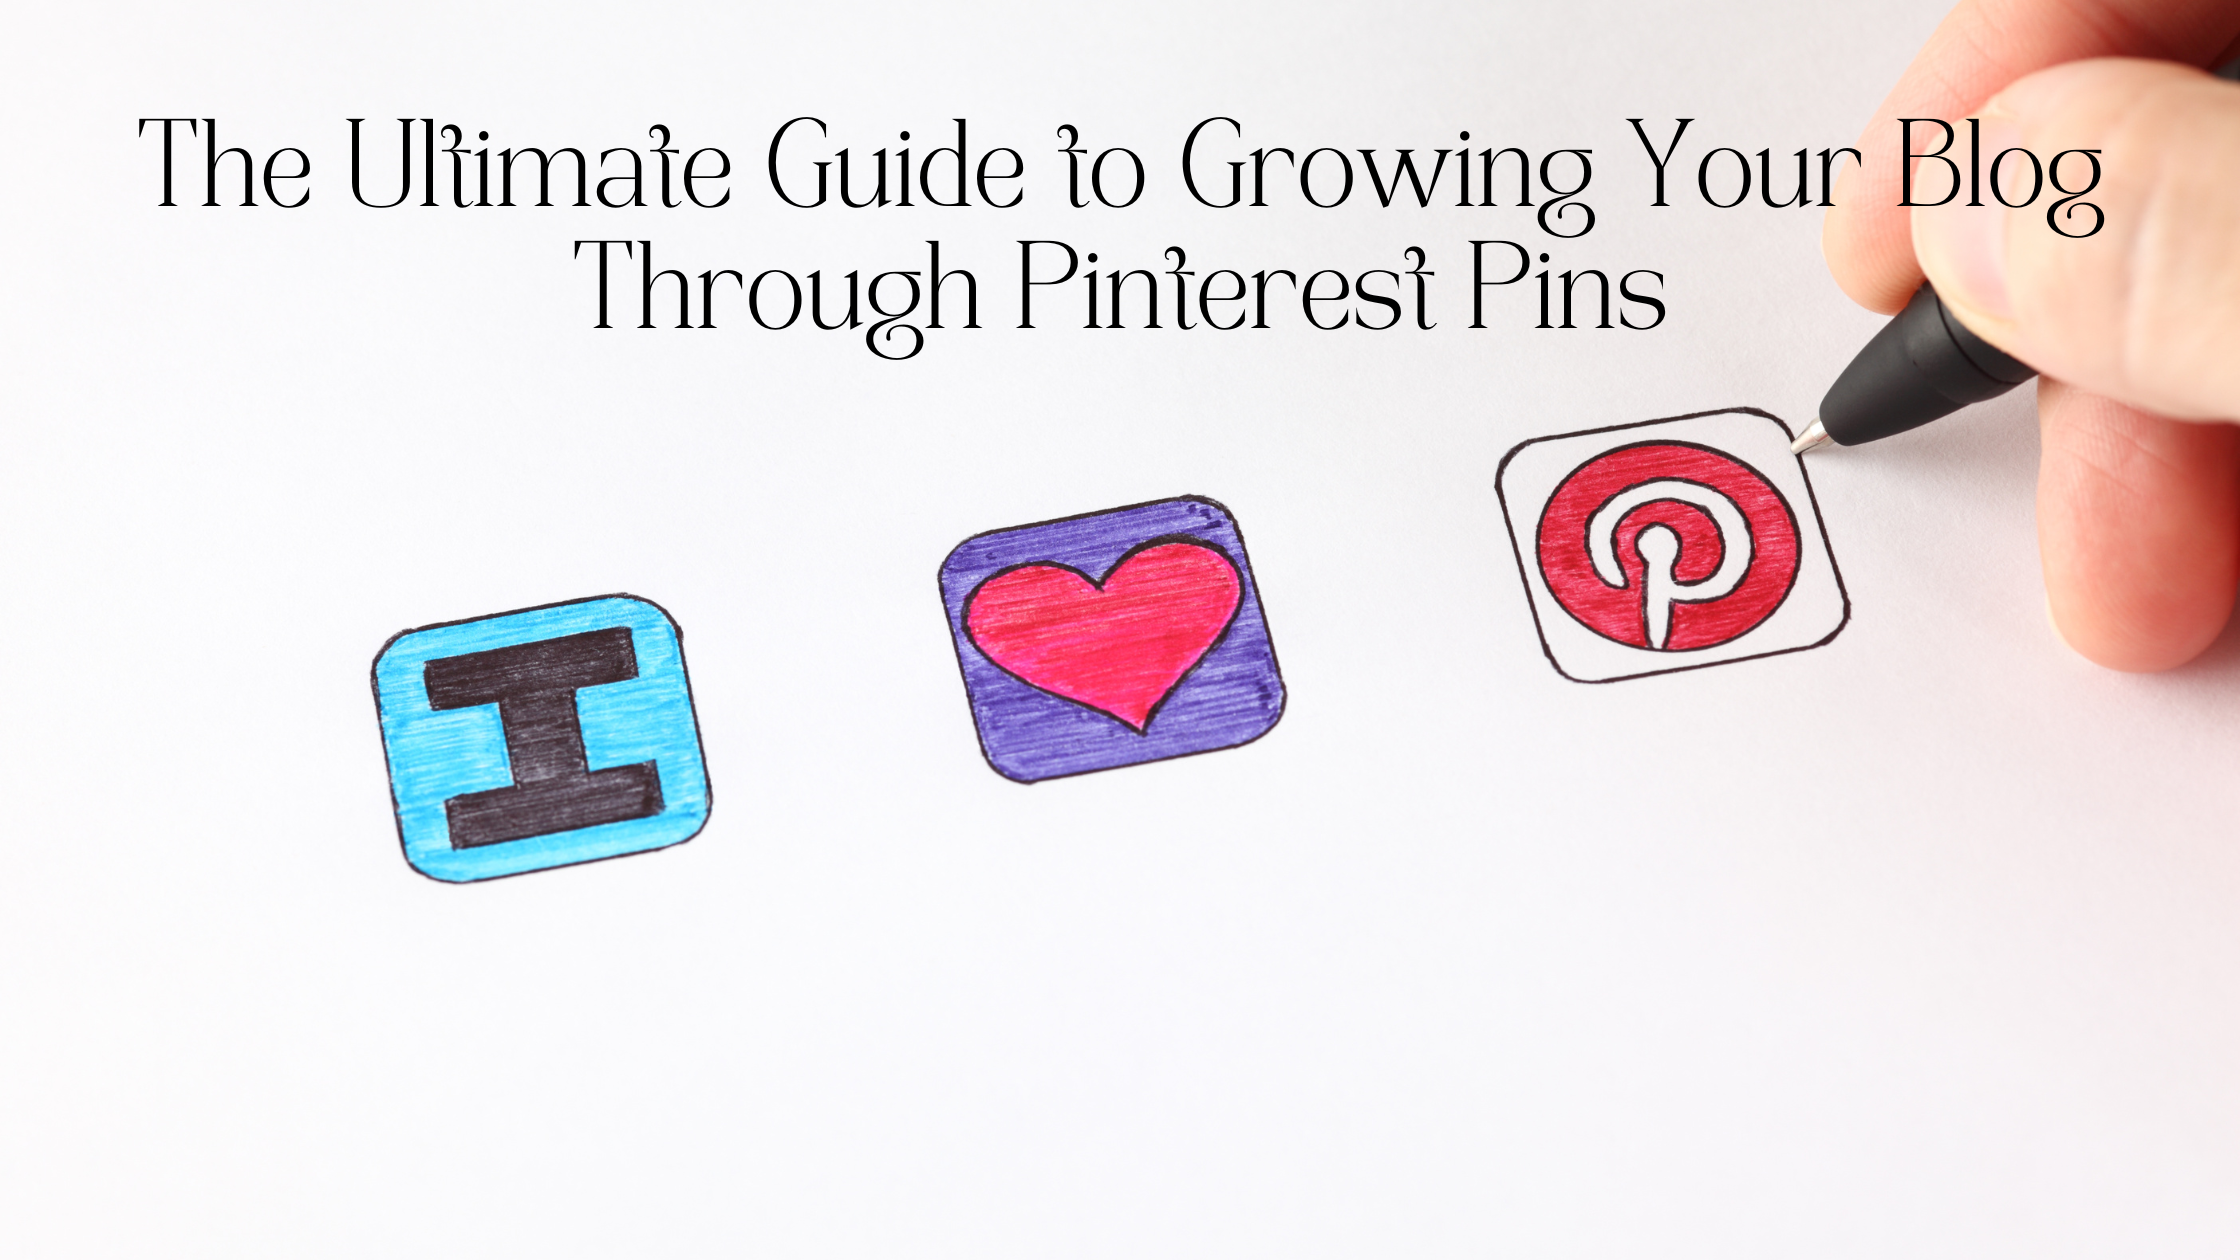 The Ultimate Guide to Growing Your Blog Through Pinterest Pins